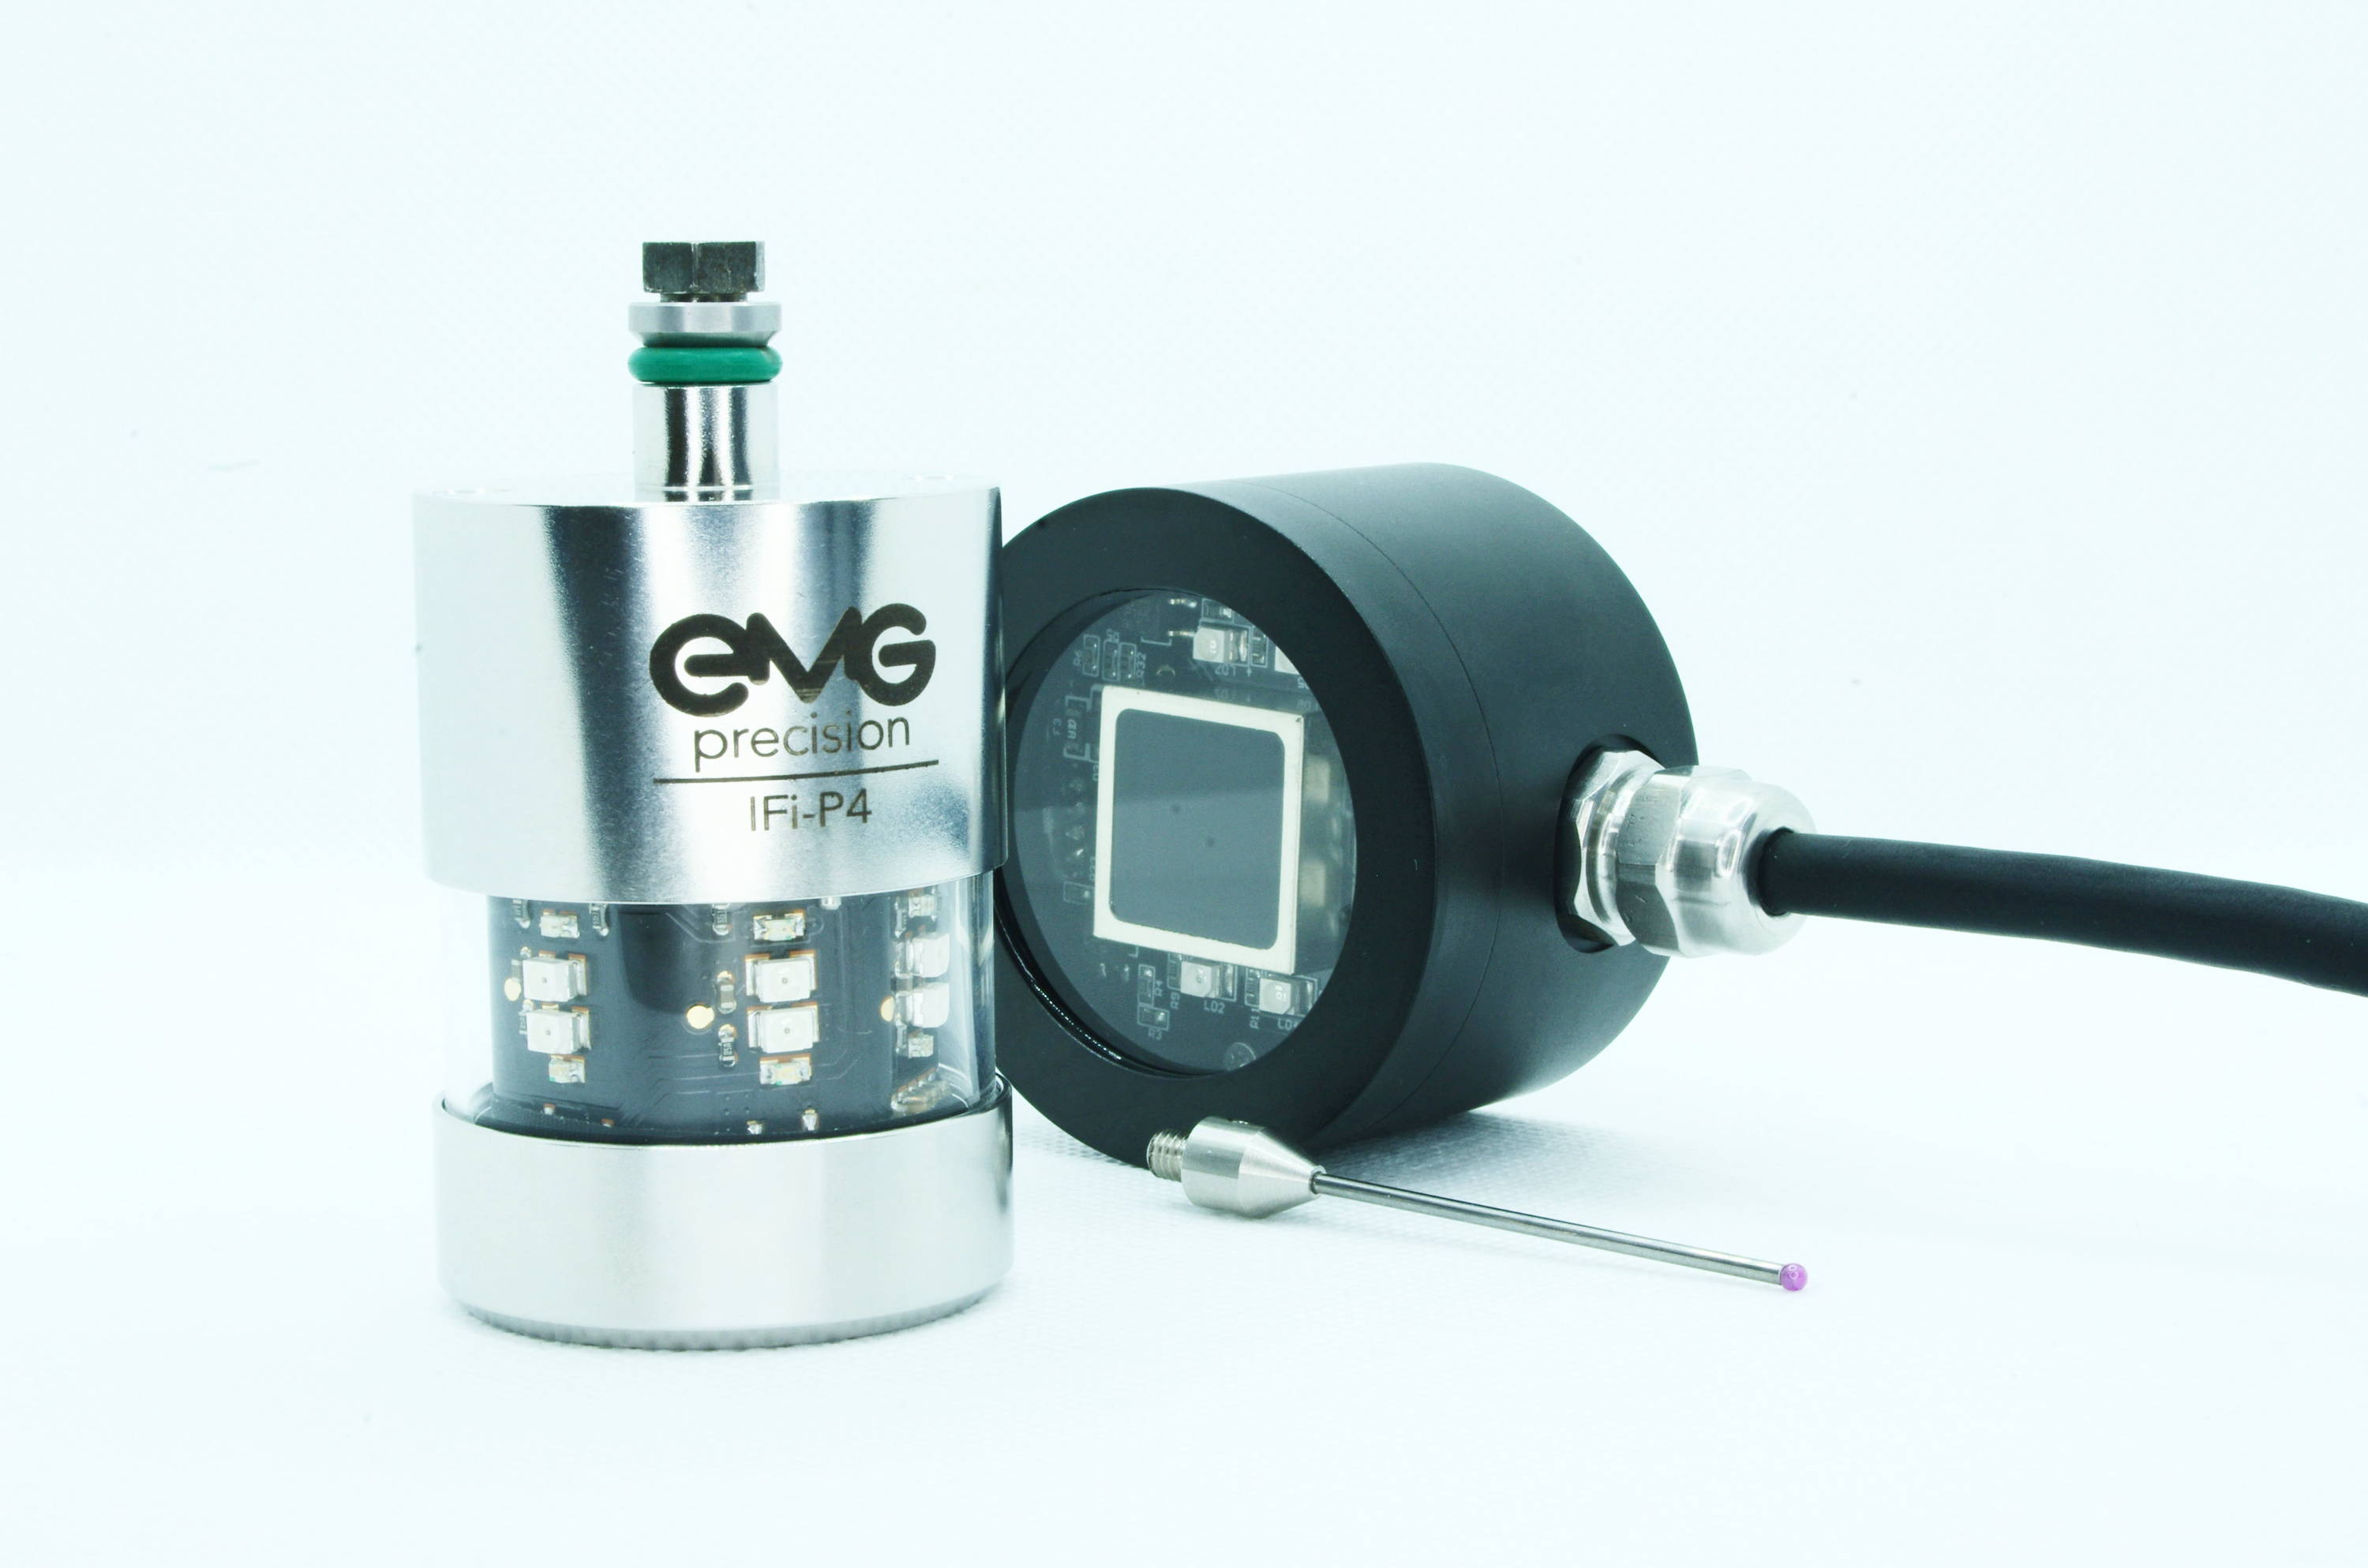 EMF IFi-P4 Touch Probe and Receiver